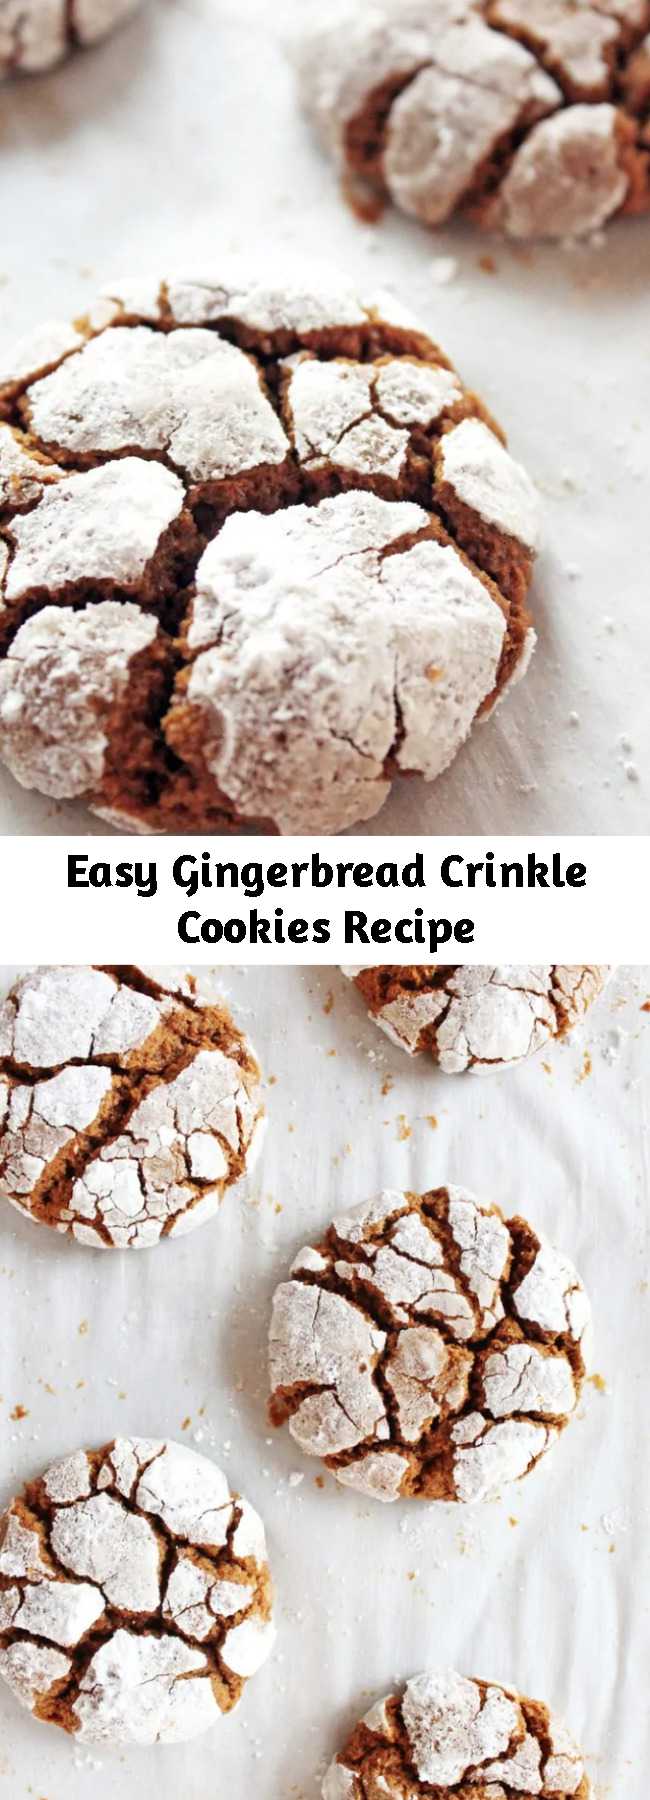 Easy Gingerbread Crinkle Cookies Recipe - Gingerbread crinkle cookies are a must-try during the holidays. They are chewy, full of ginger flavor and coated in sugar with exposed cookie cracks.